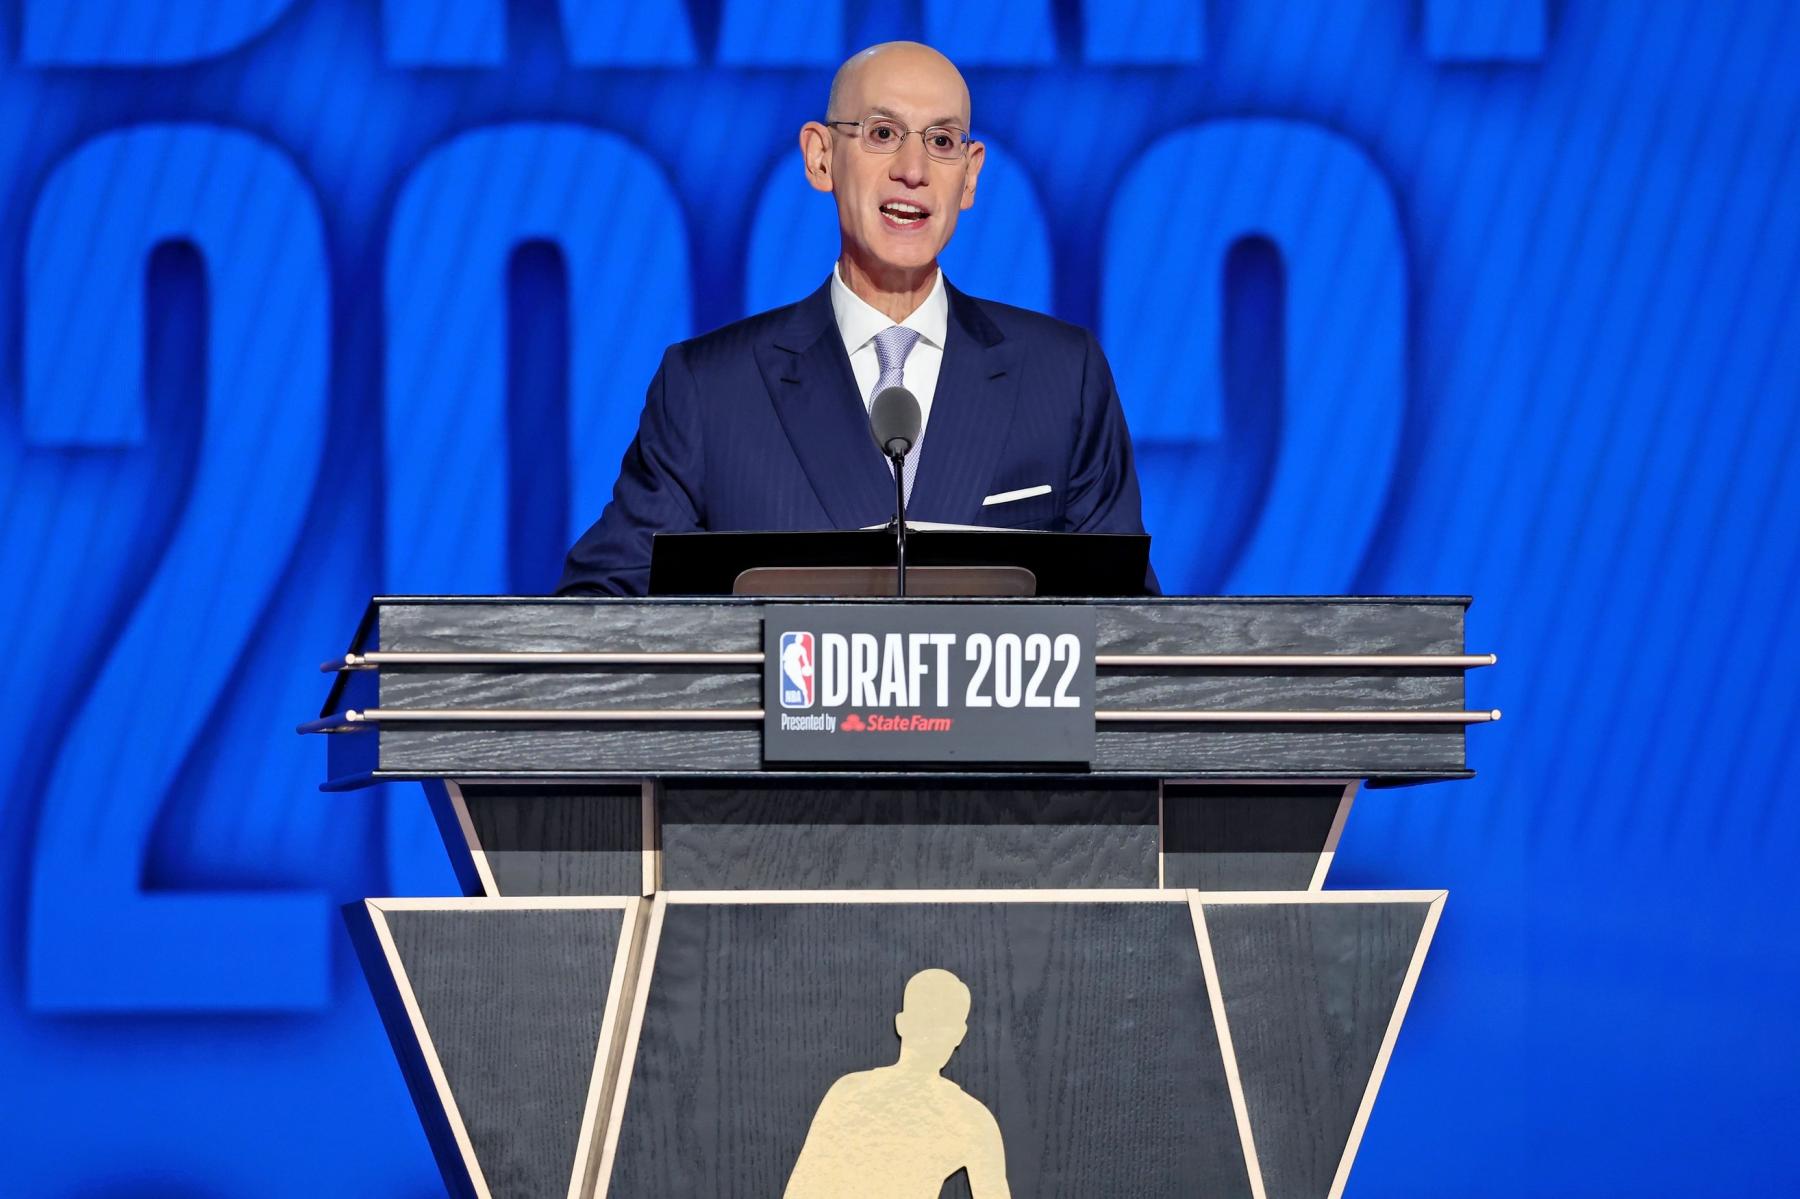 NBA commissioner Adam Silver speaks before the first round of the 2022 NBA Draft at Barclays Center. Mandatory Credit: Brad Penner-USA TODAY Sports